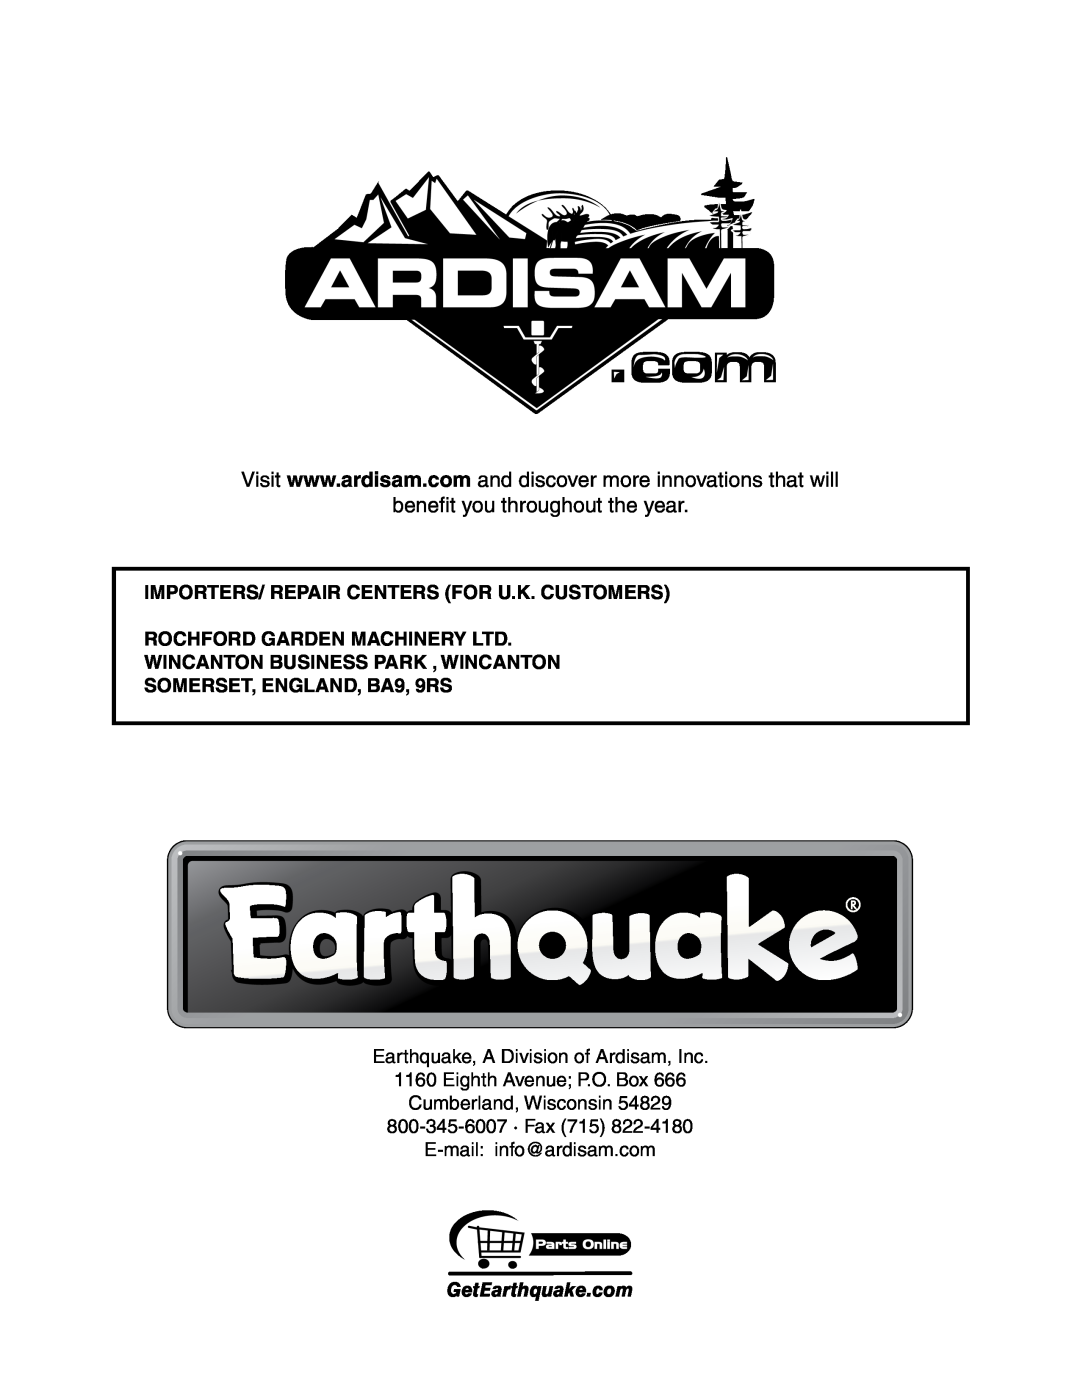 EarthQuake 3365PSCE benefit you throughout the year, Importers/ Repair Centers for U.K. Customers, Cumberland, Wisconsin 